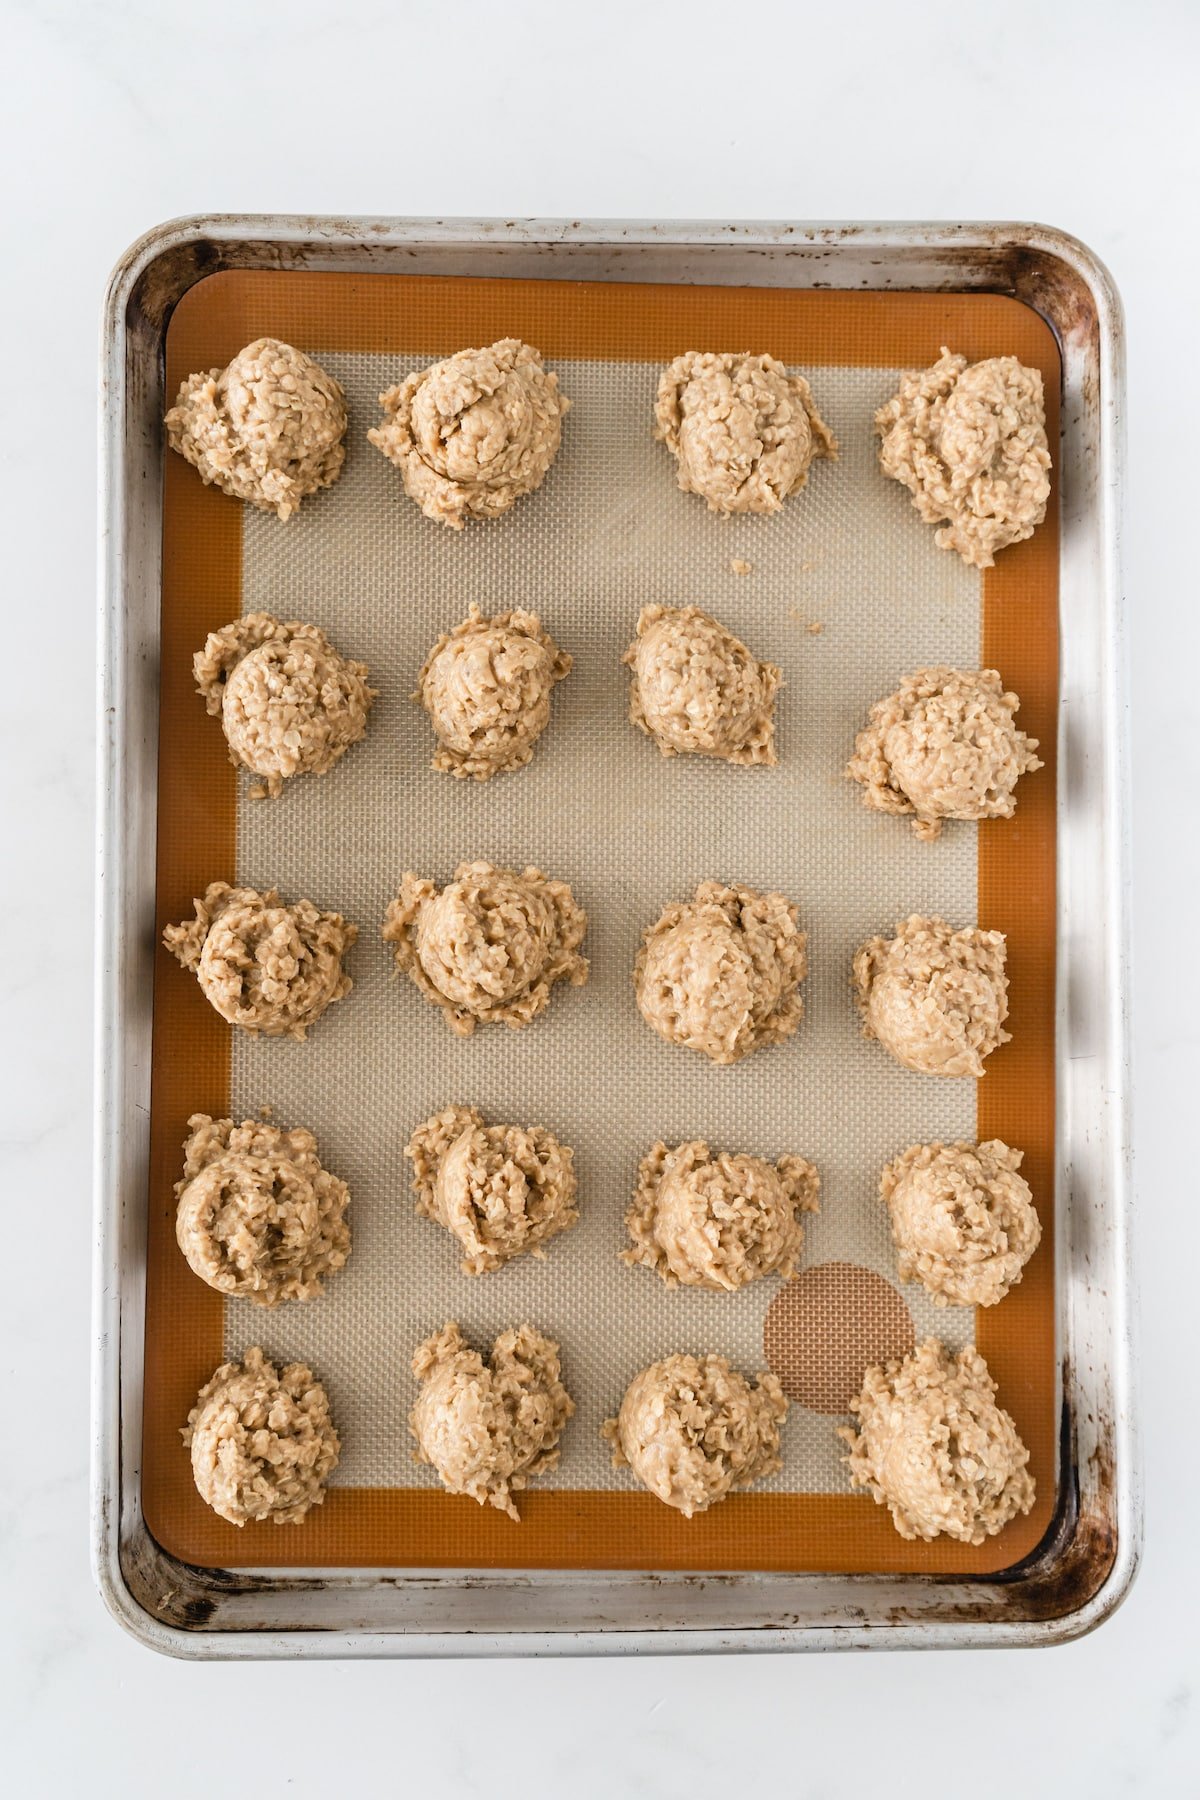 Delicious No-Bake Cookies on a Serving Tray